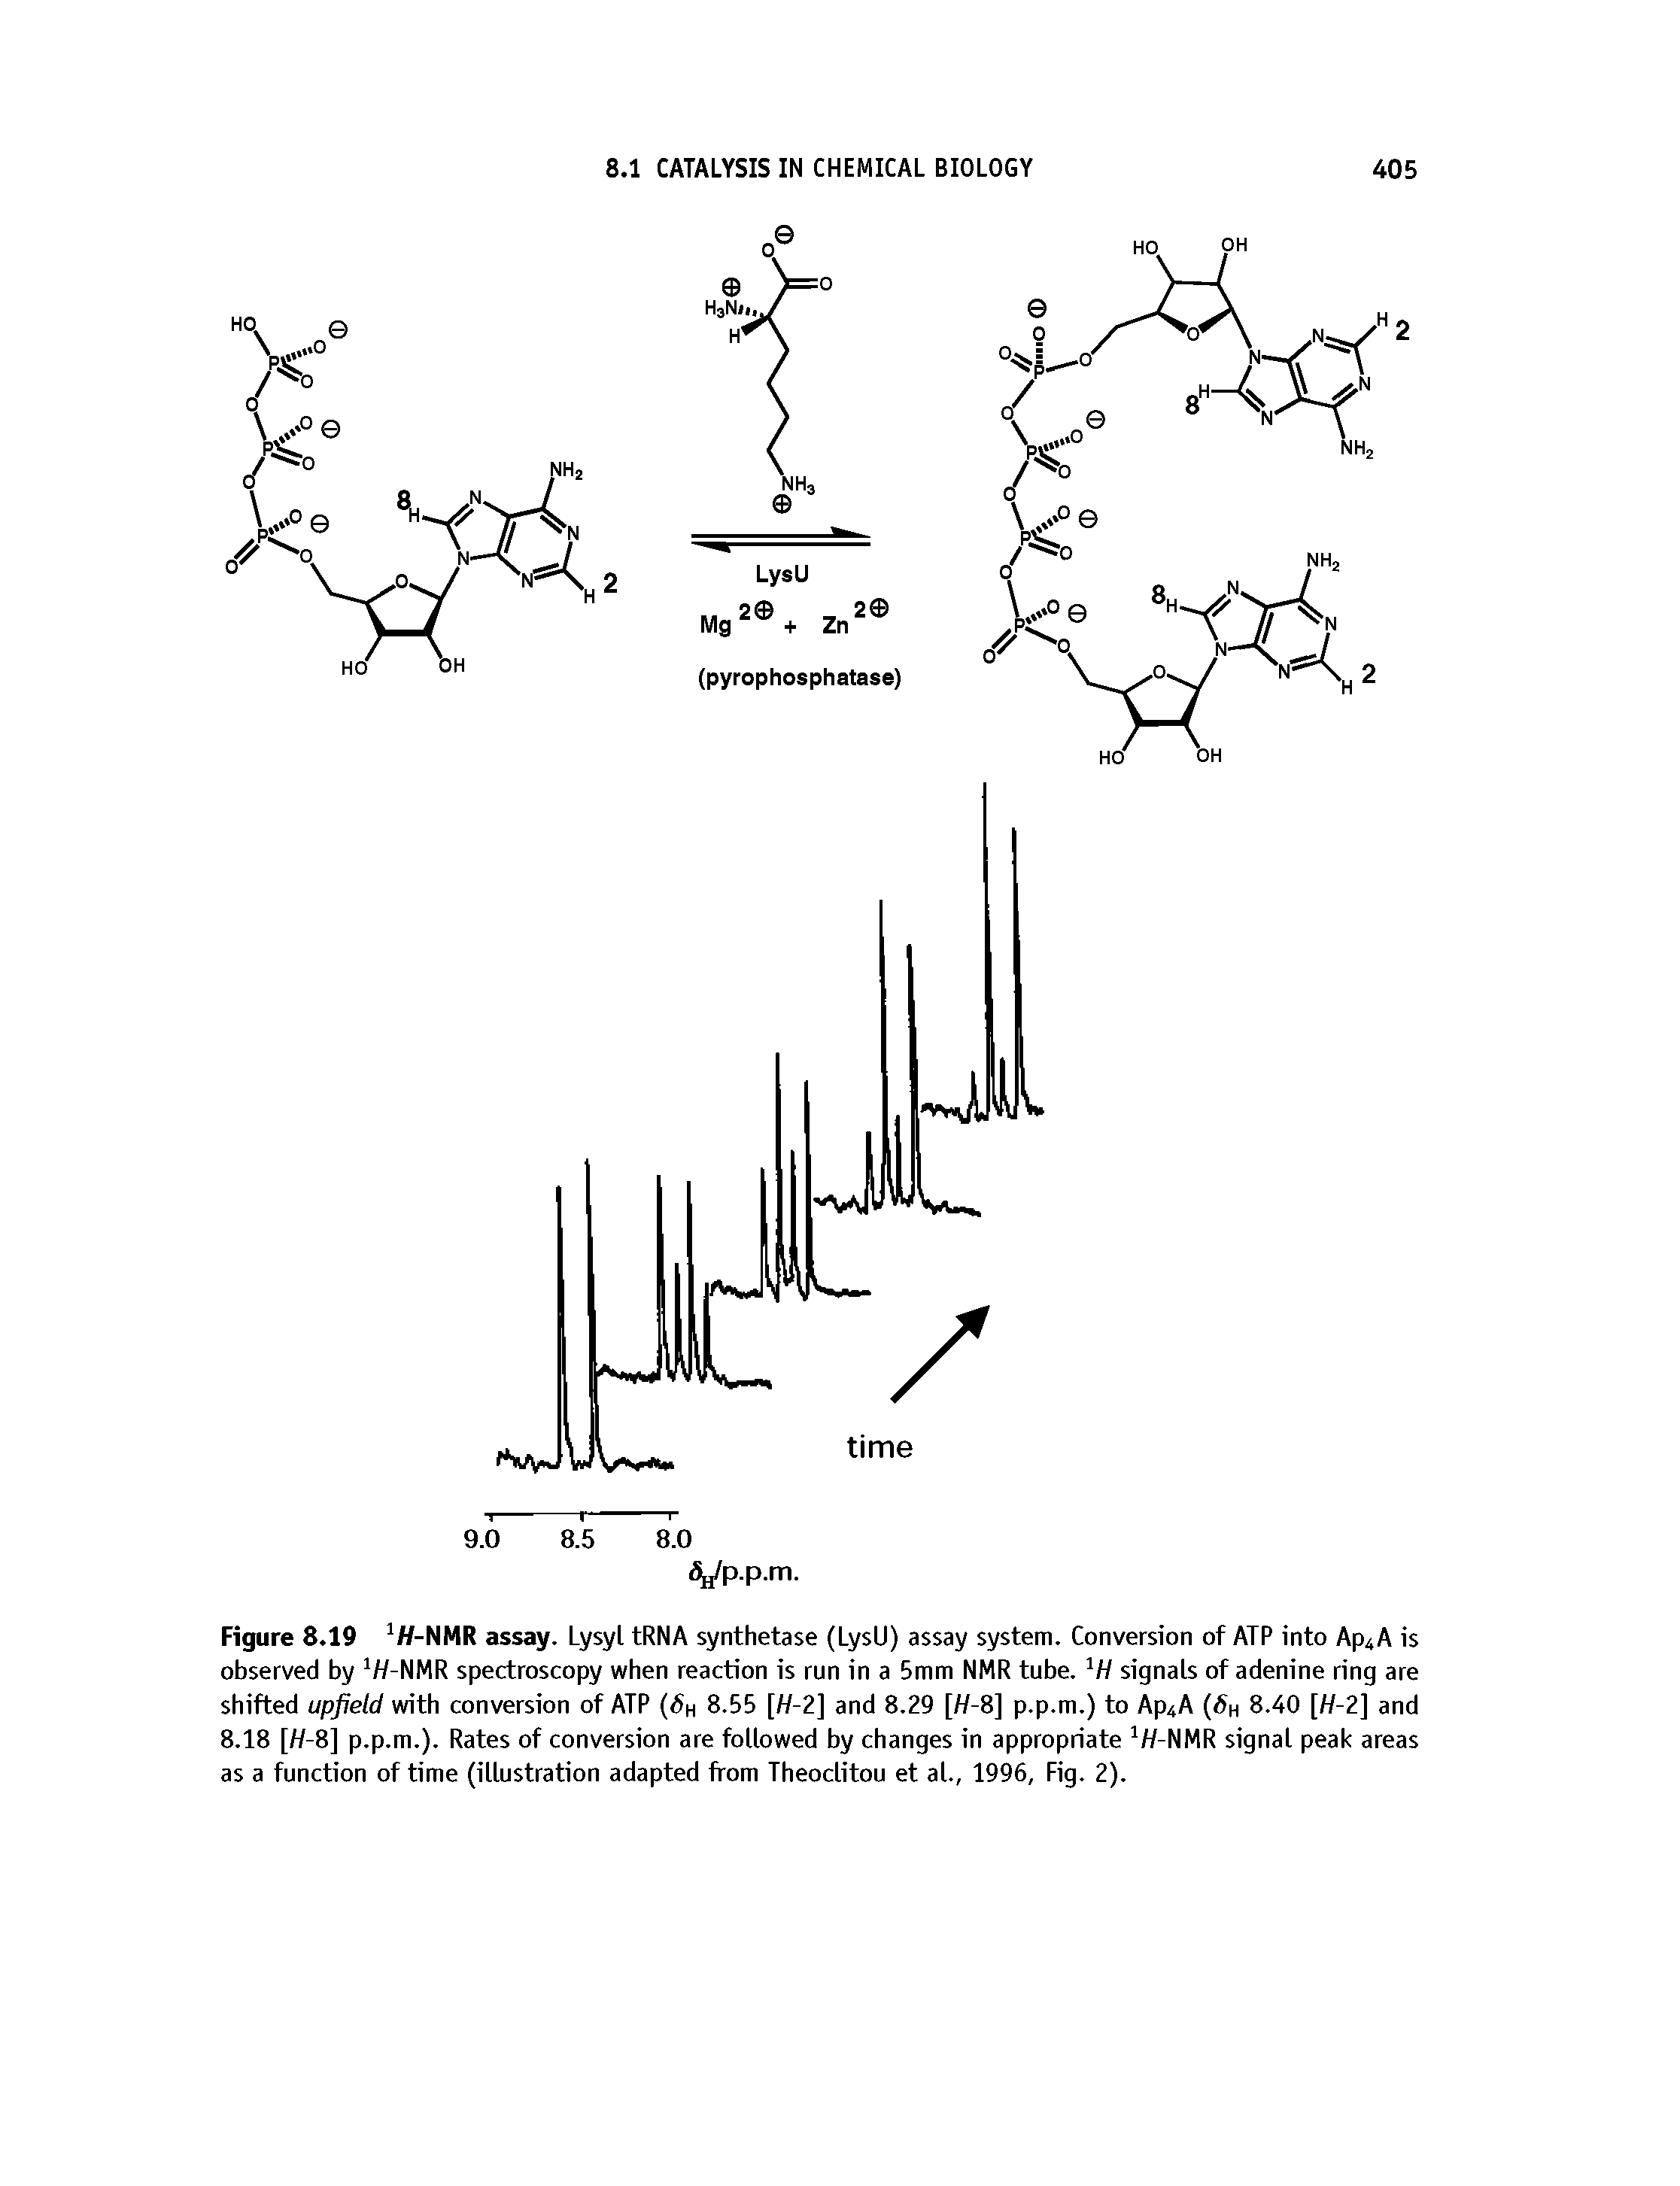 Figure 8.19 H-NMR assay. Lysyl tRNA synthetase (LysU) assay system. Conversion of ATP into Ap A is observed by W-NMR spectroscopy when reaction is run in a 5mm NMR tube. signals of adenine ring are shifted upfield with conversion of ATP (6h 8.55 [H-2] and 8.29 [W-8] p.p.m.) to Ap4A ( h 8.40 [H-2] and 8.18 [W-8] p.p.m.). Rates of conversion are followed by changes in appropriate W-NMR signal peak areas as a function of time (illustration adapted from Theoclitou et al., 1996, Fig. 2).